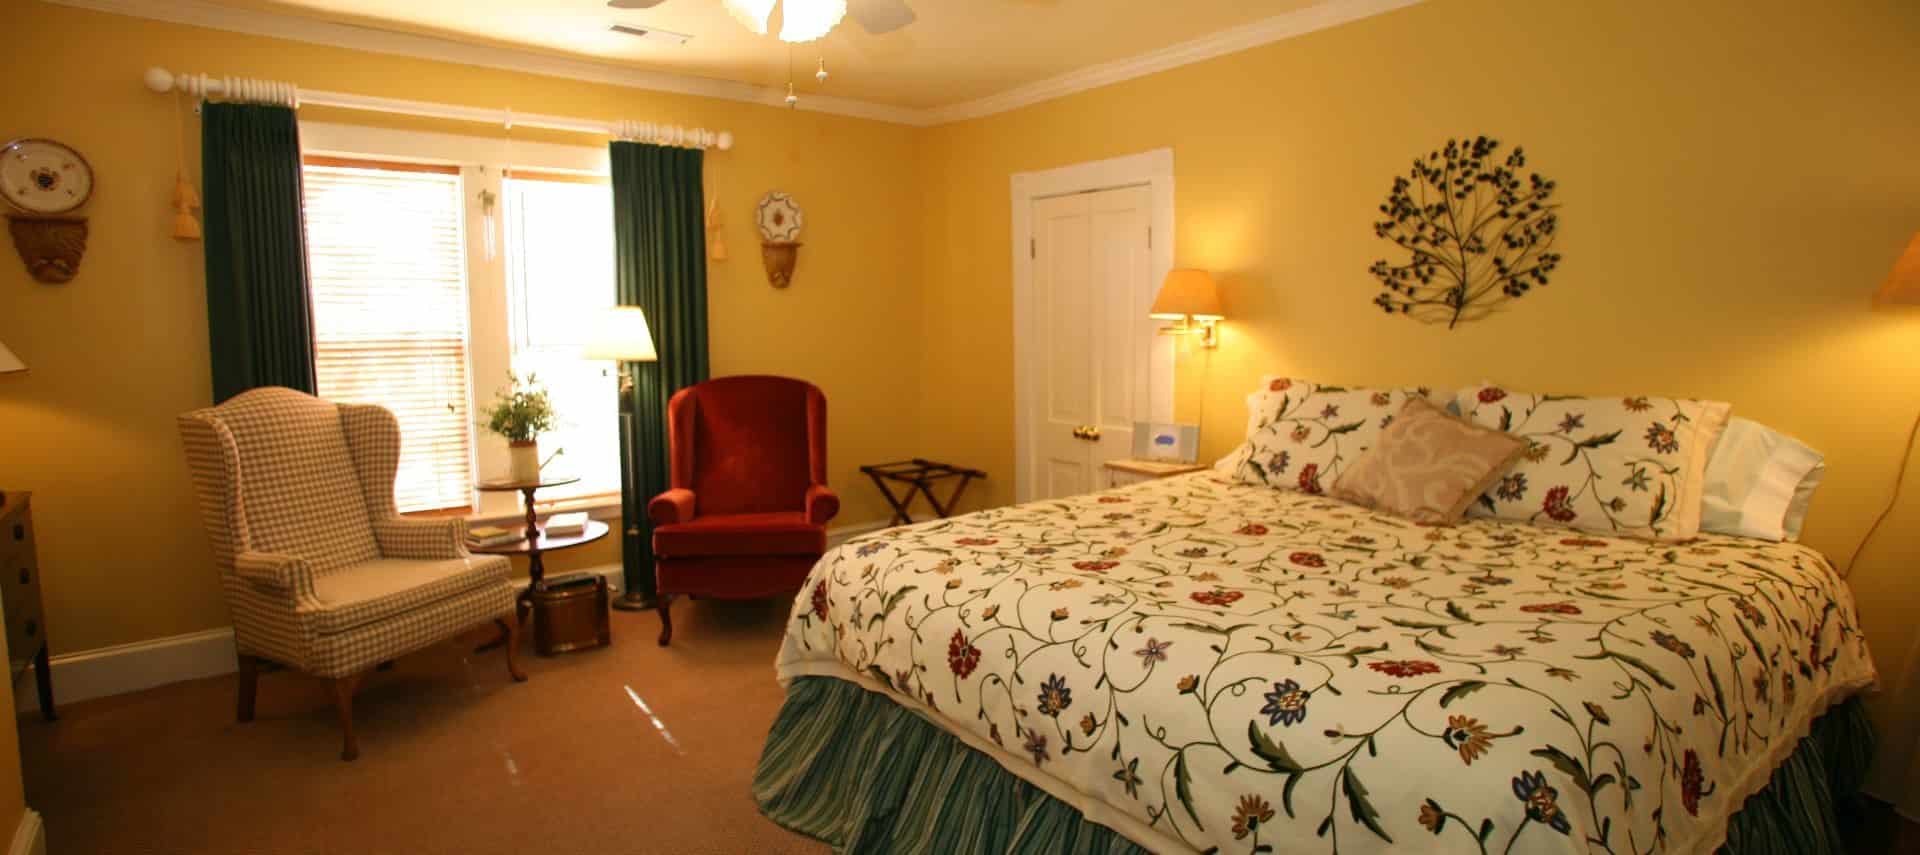 Bedroom with yellow walls, carpeting, floral bedding with green bed skirt, and sitting area with arm chairs and small table